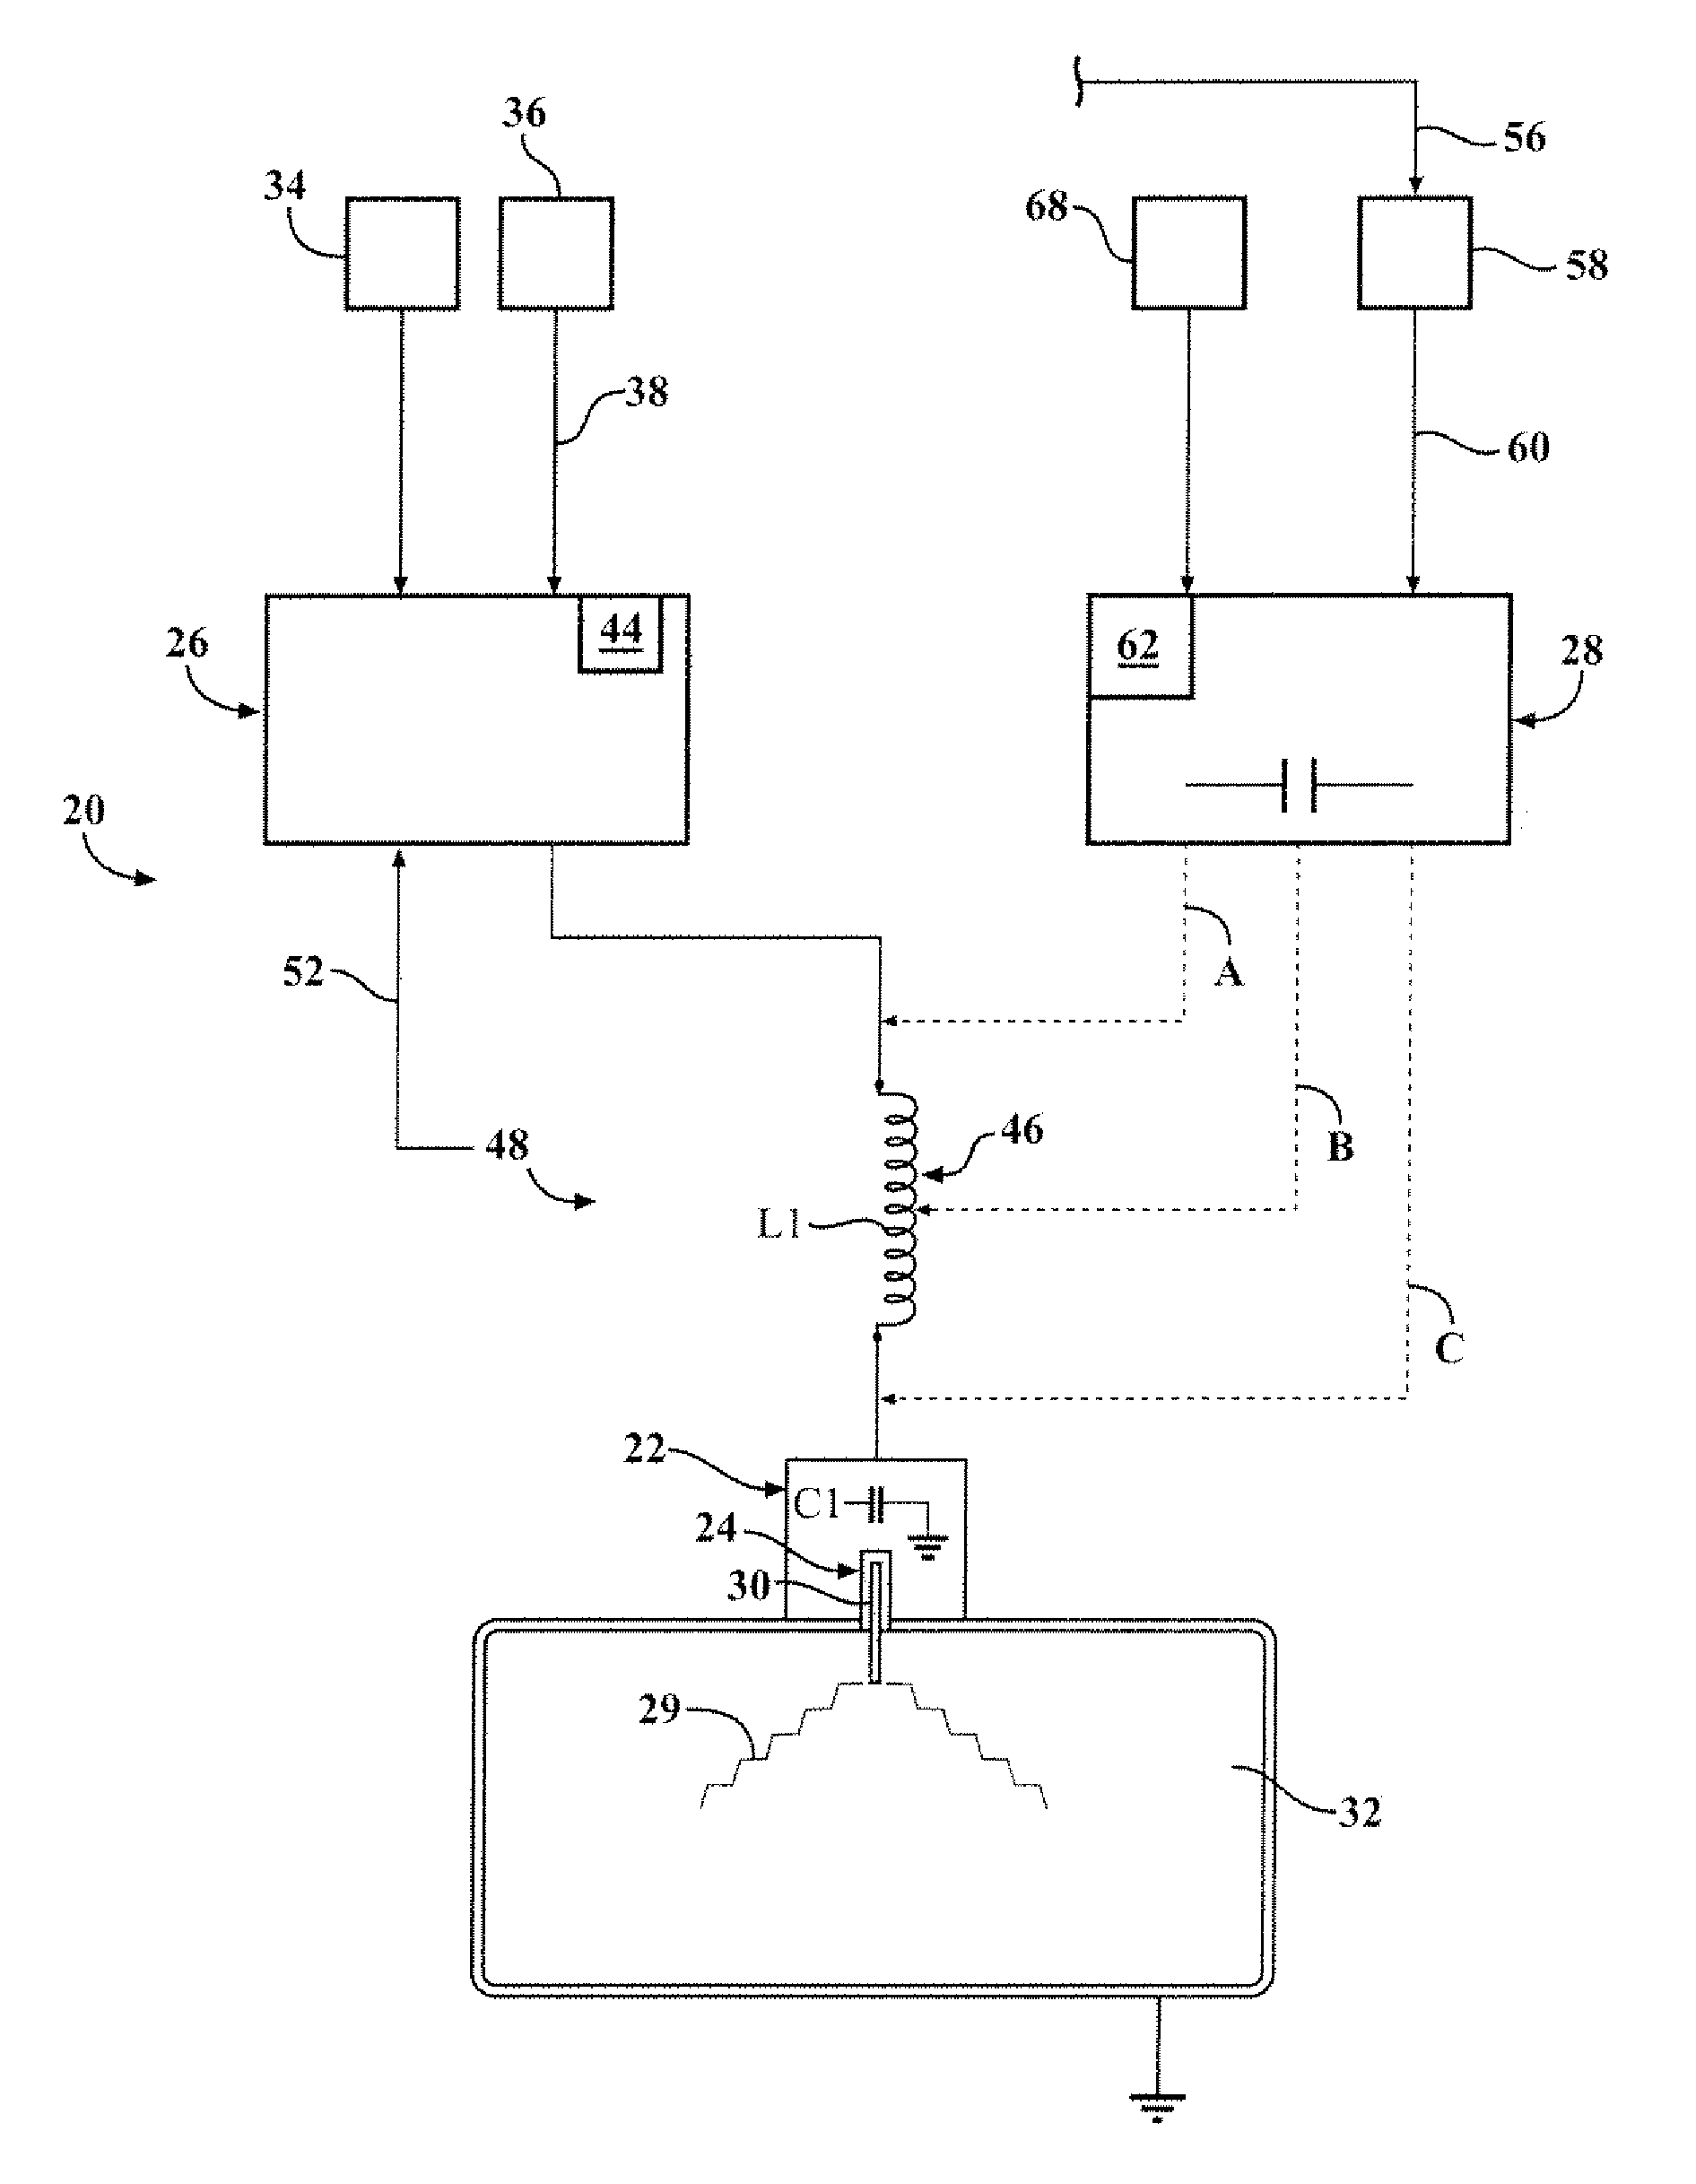 Electrical arrangement of hybrid ignition device